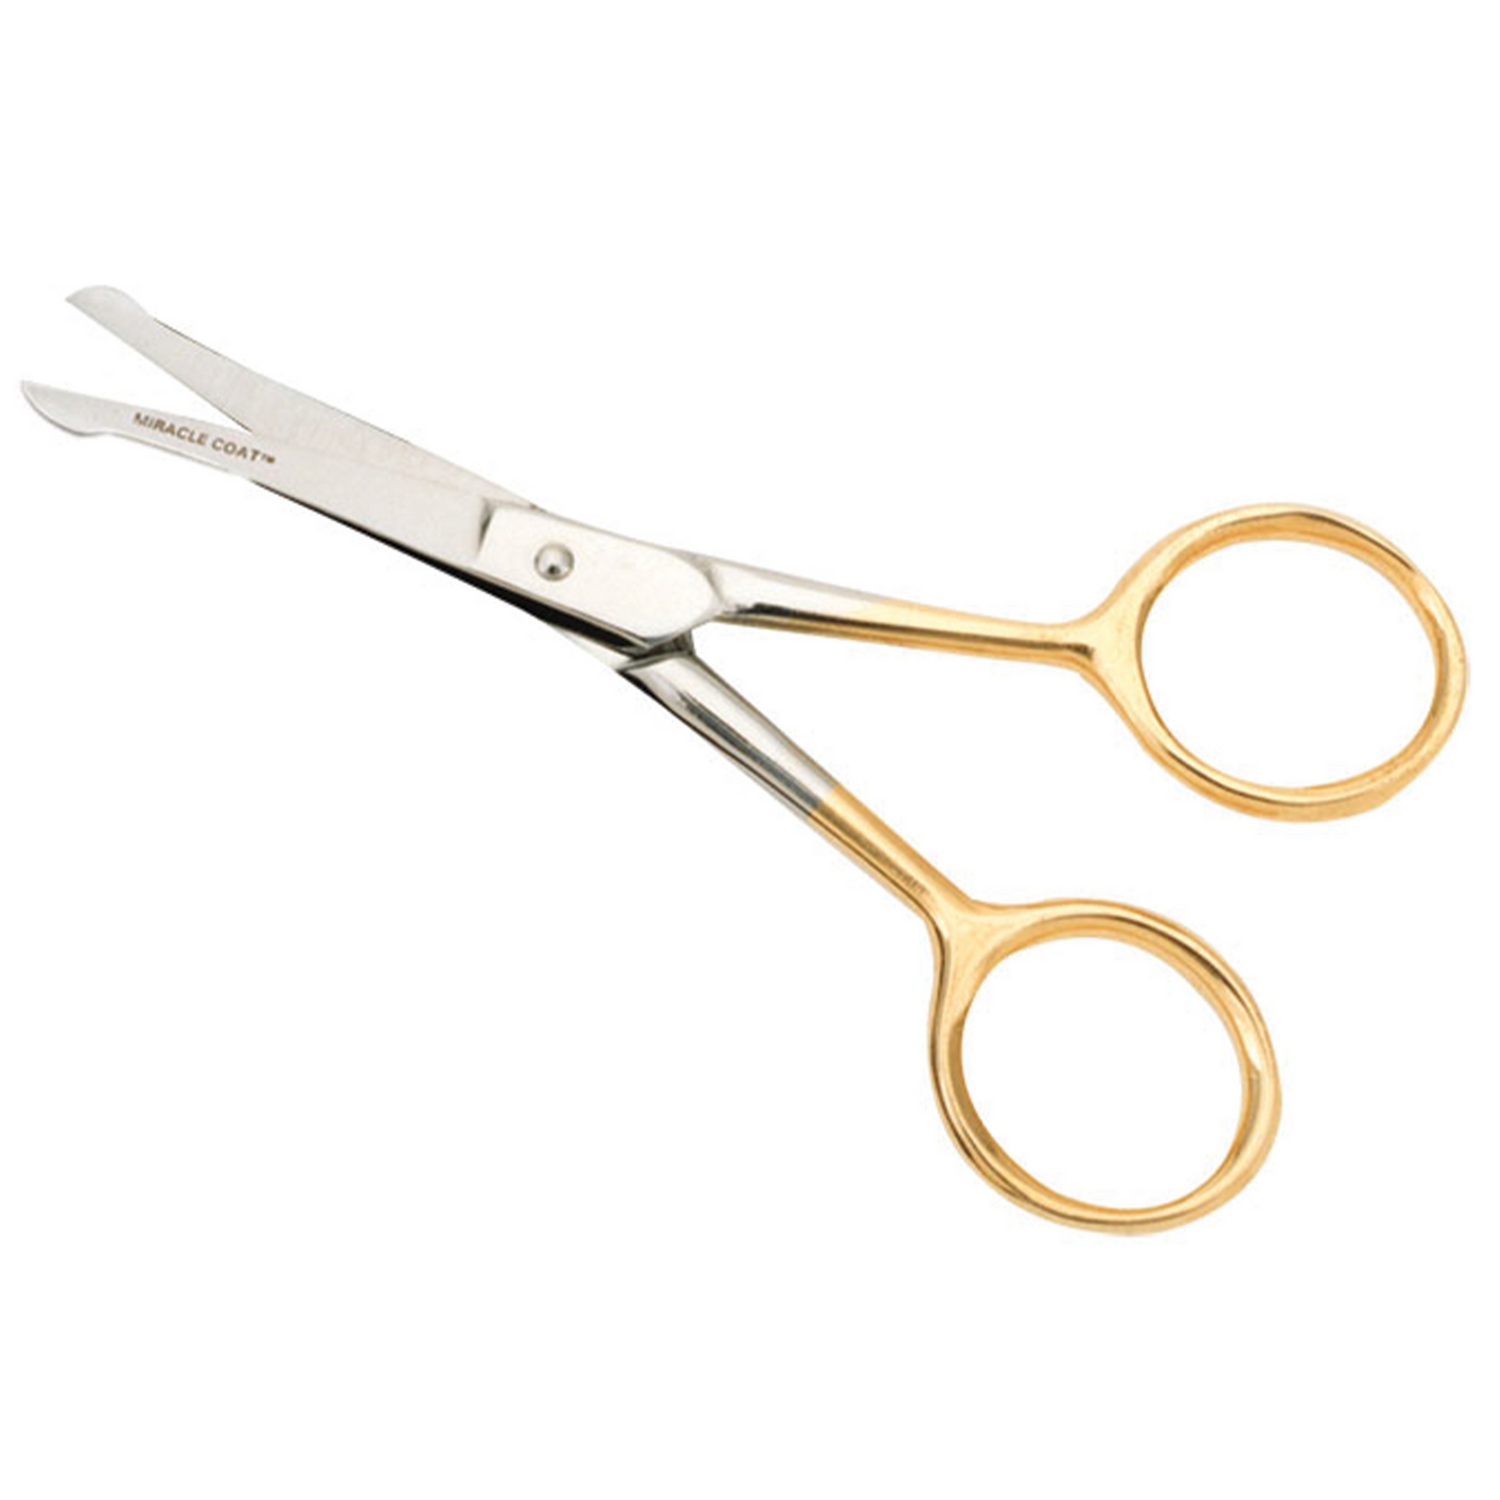 Miracle Corp Ball Tipped Shears